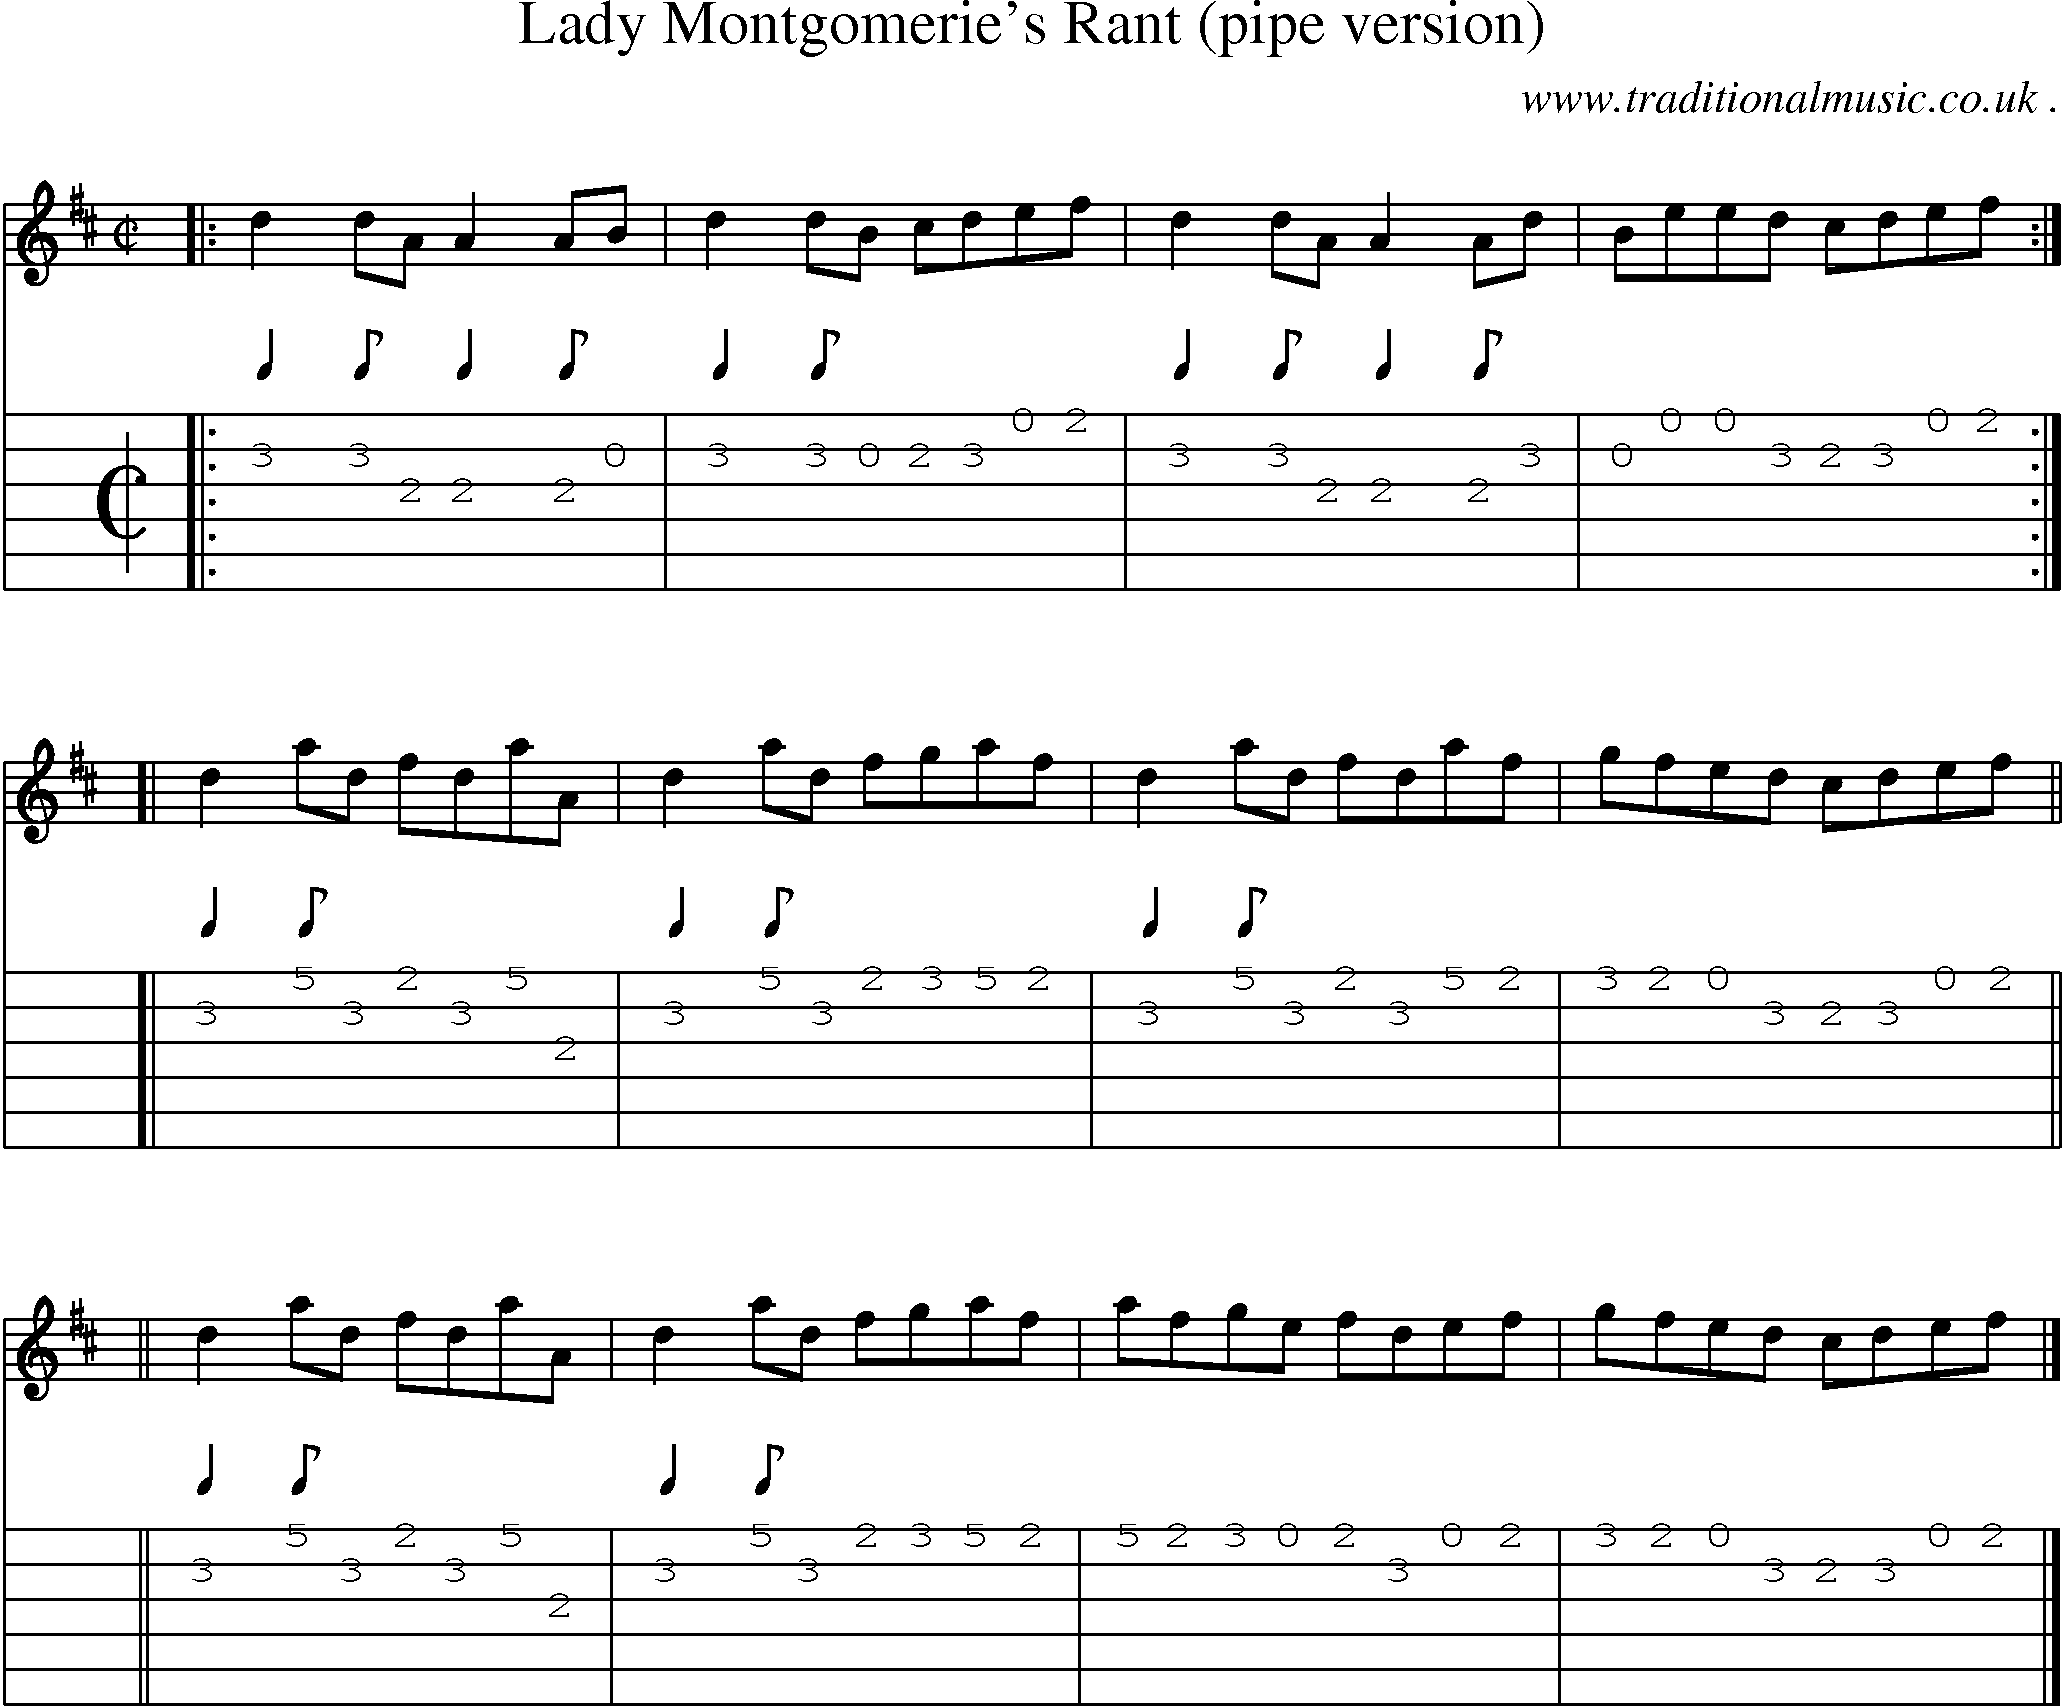 Sheet-music  score, Chords and Guitar Tabs for Lady Montgomeries Rant Pipe Version